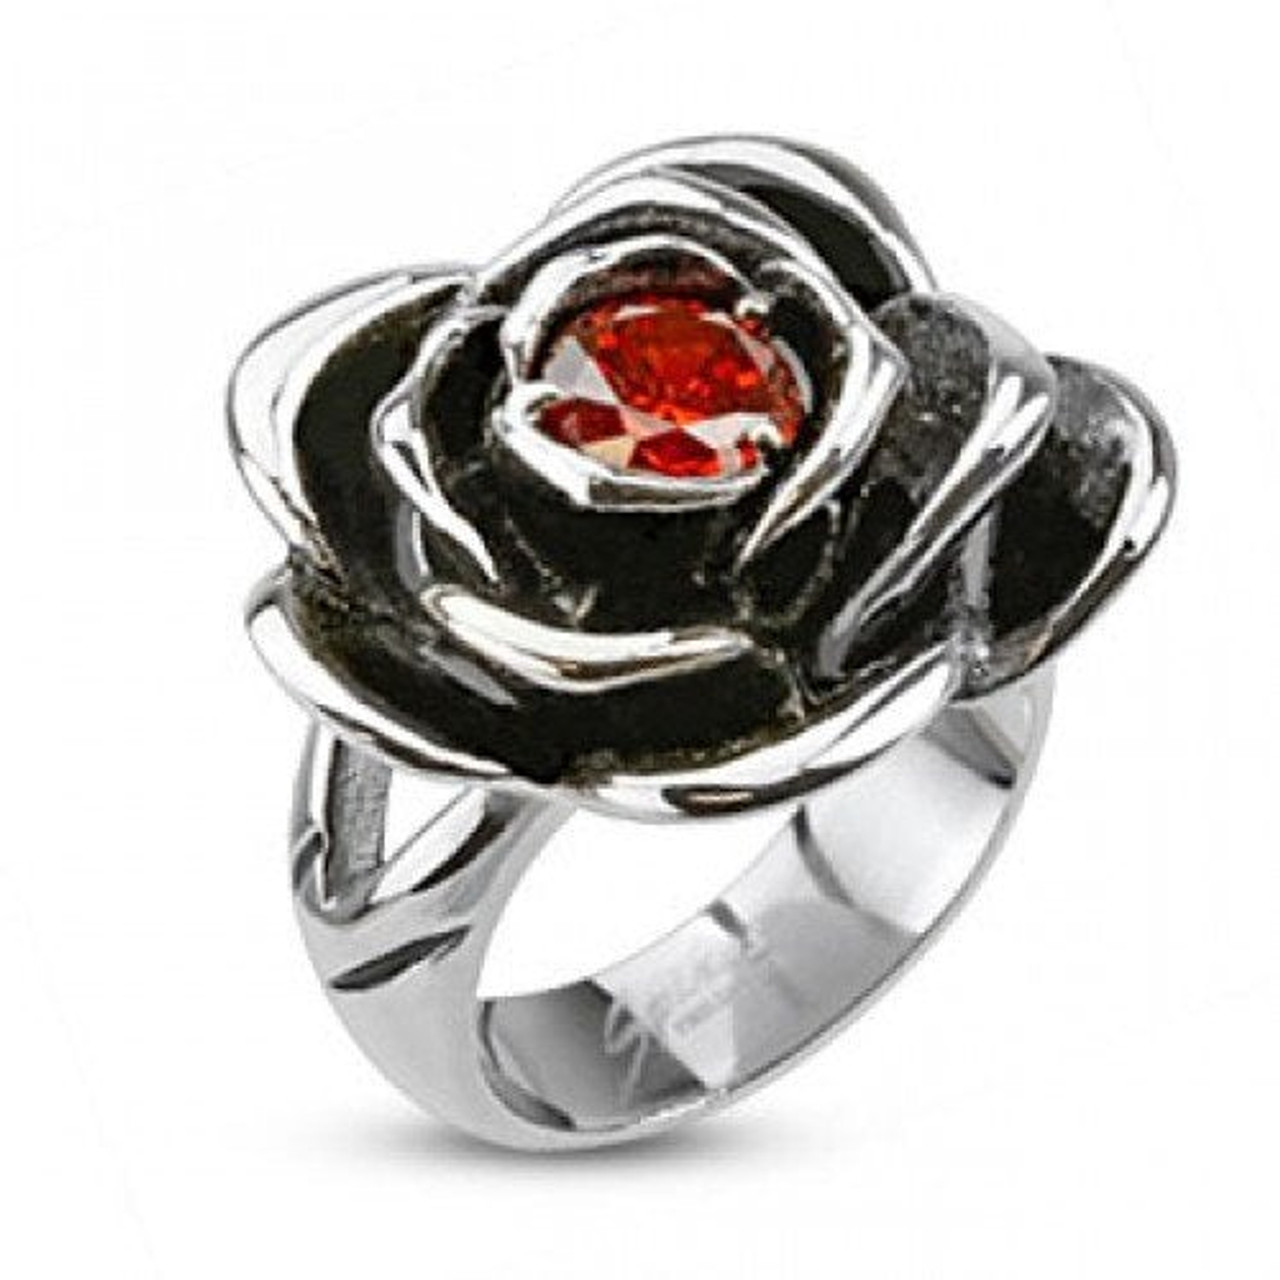 Red Rose Ring - Flower Petals Photography Handmade Silver Jewelry - 768 |  eBay